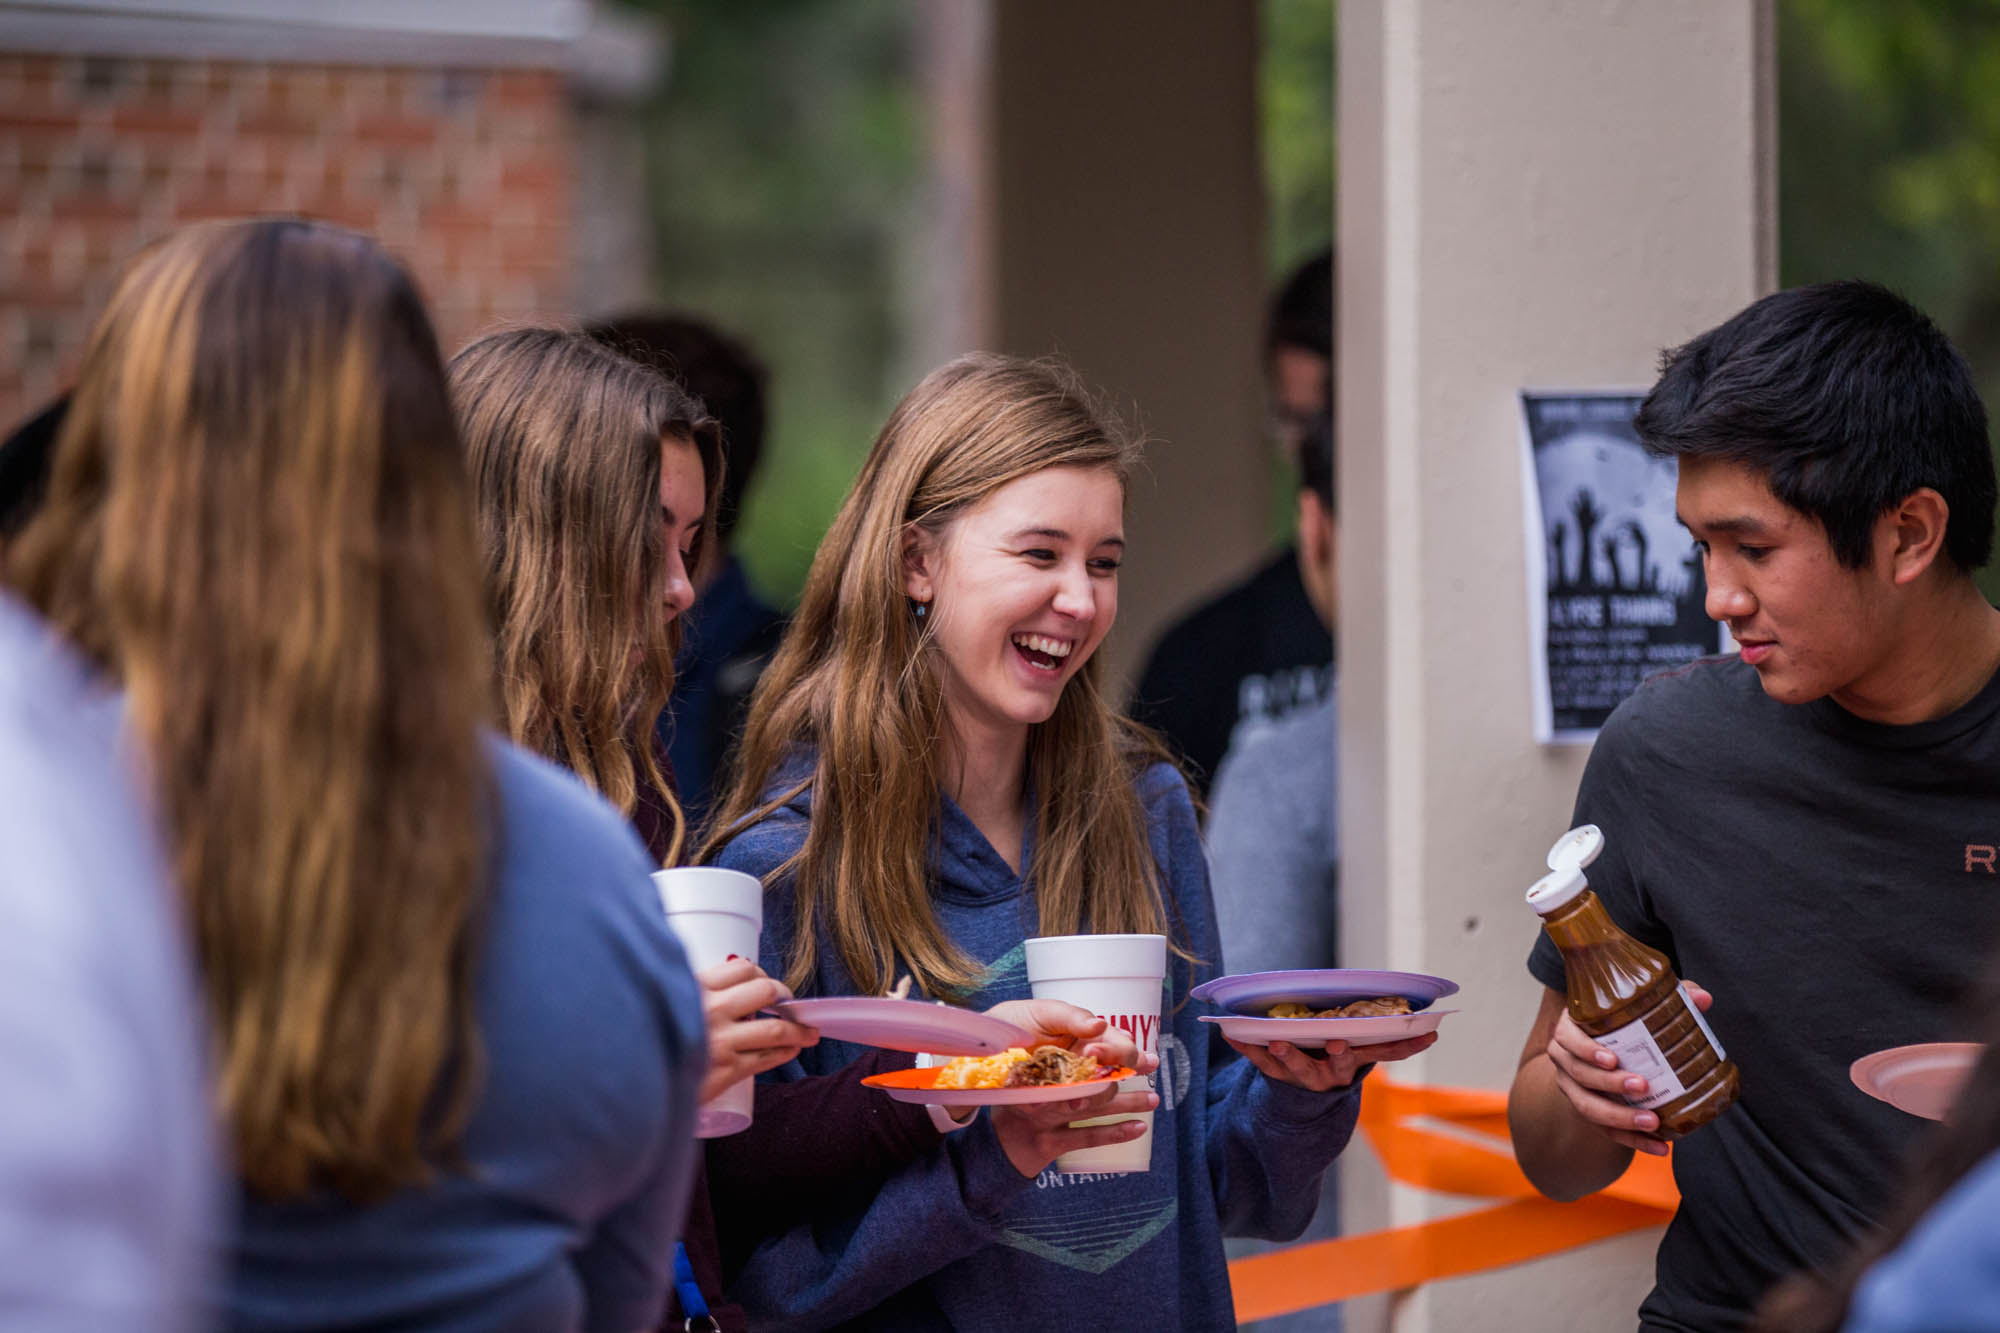 A student collects a plate of food at an event.